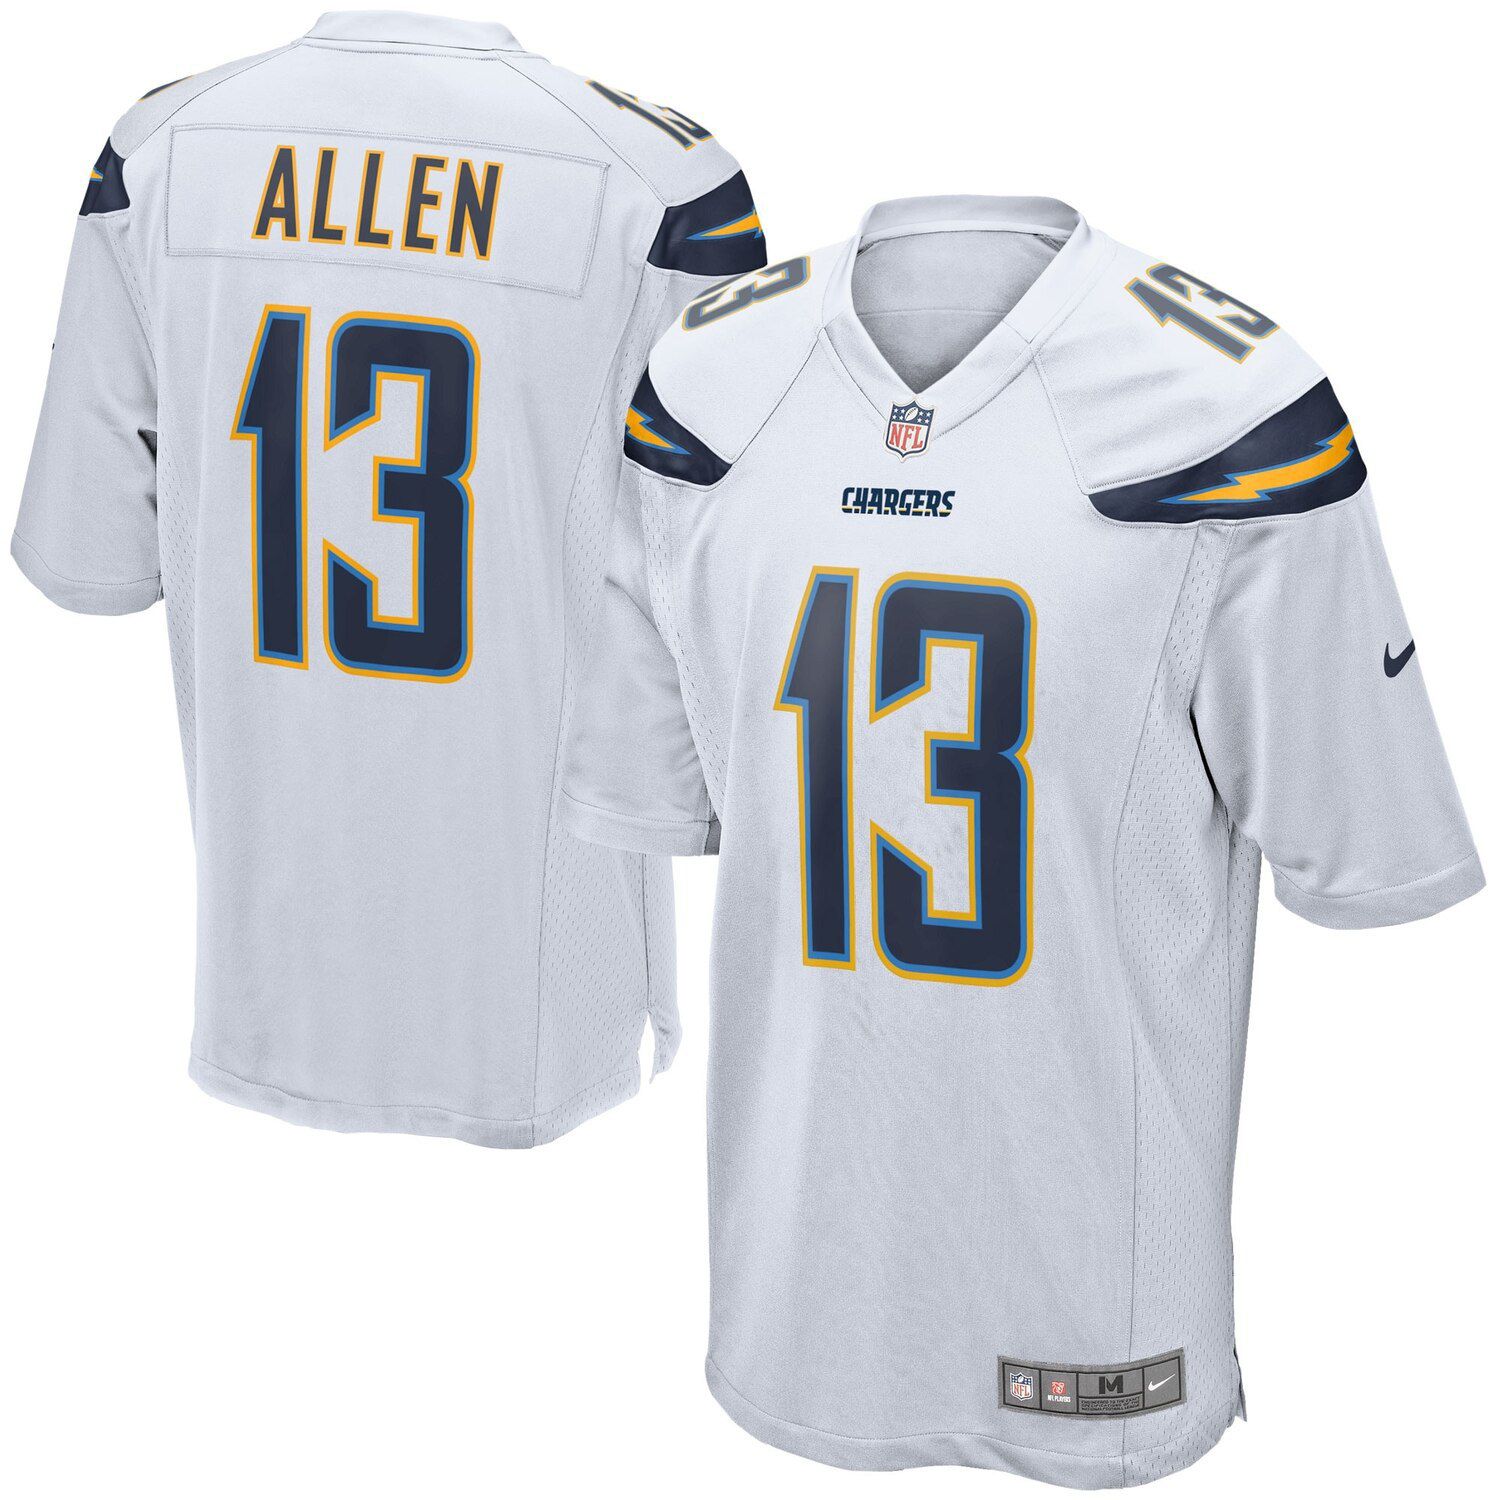 Keenan Allen White Los Angeles Chargers 